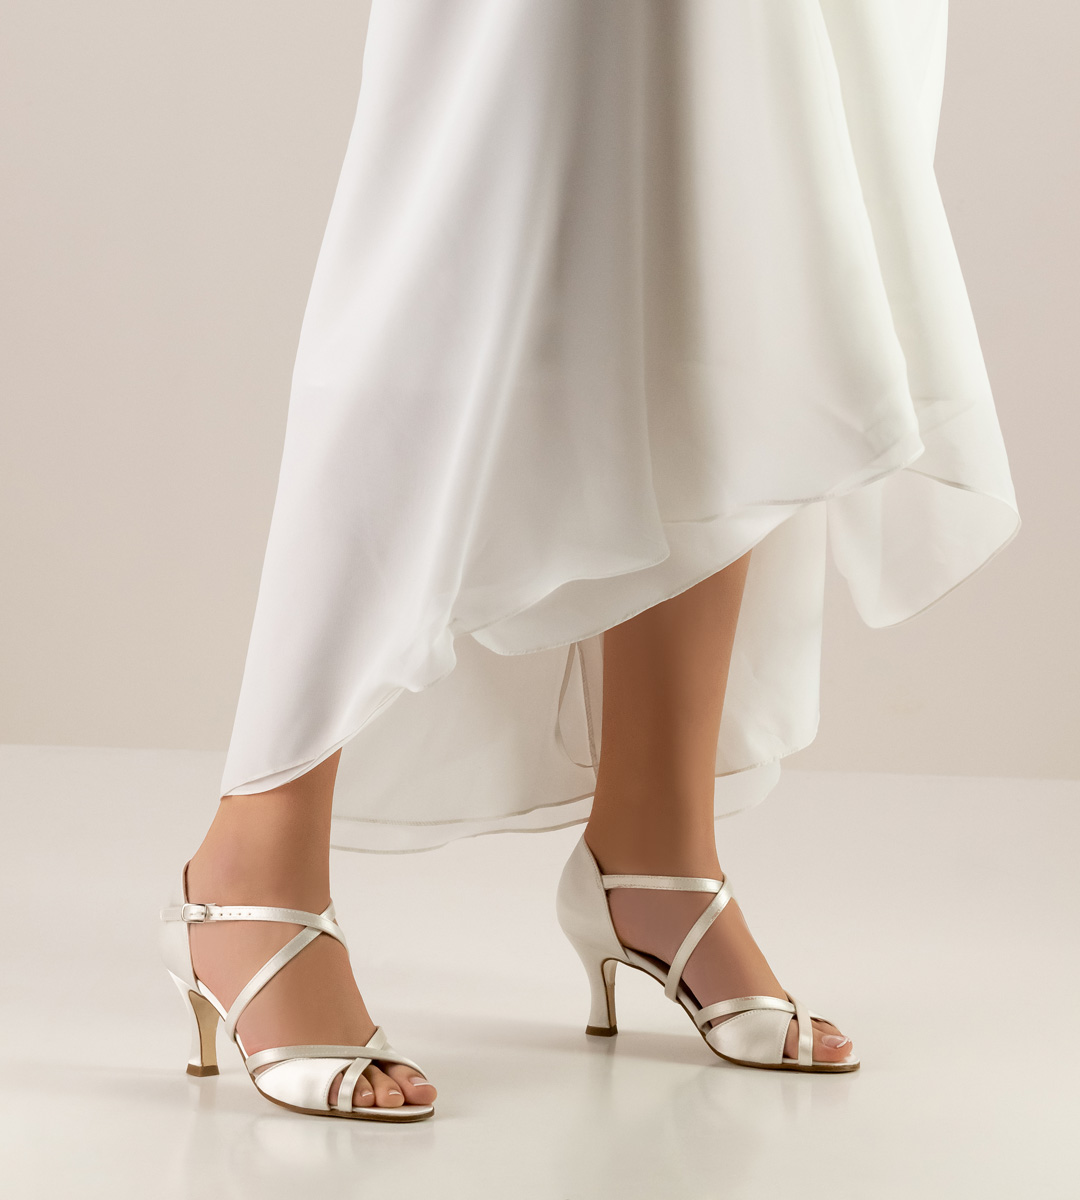 Werner Kern open bridal shoe with leather sole in combination with white wedding dress